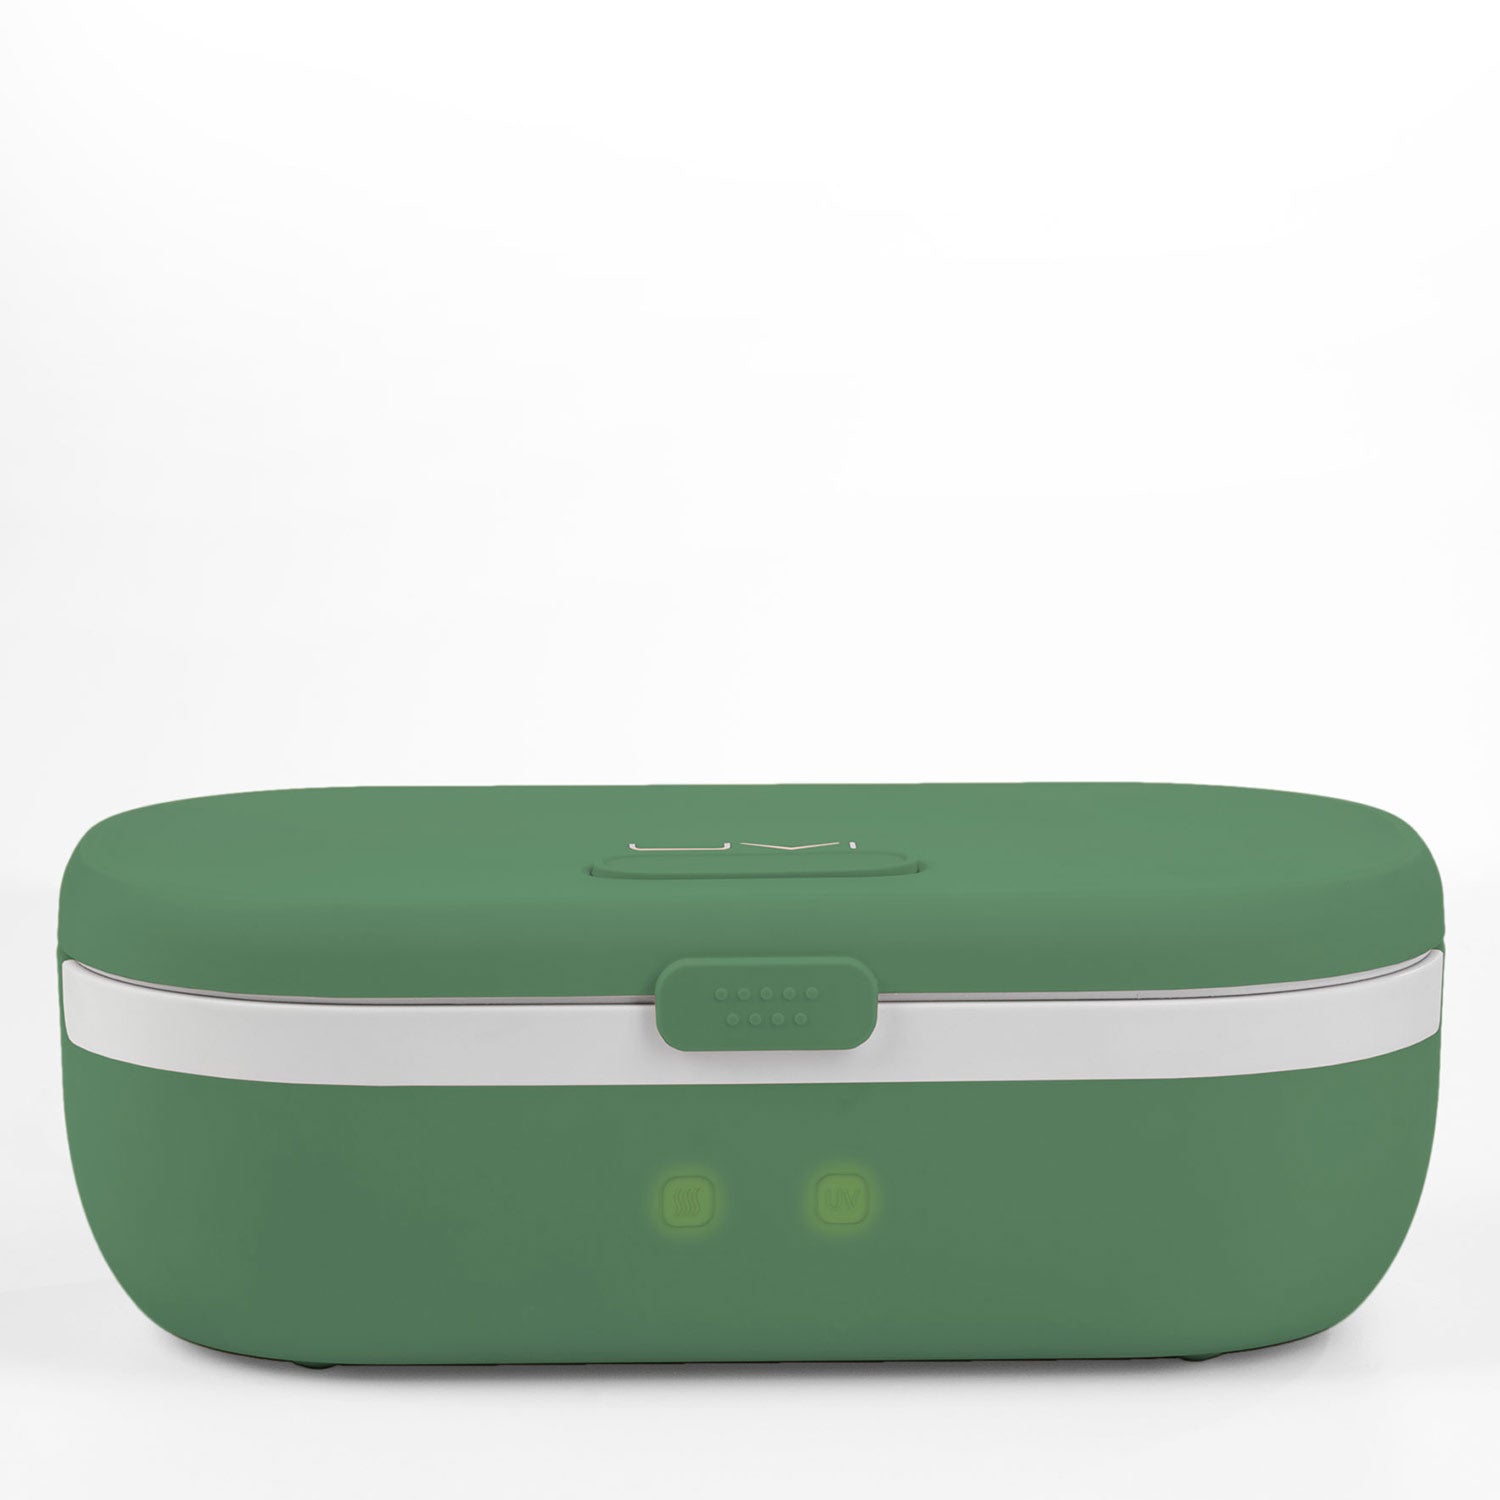 Uvi, The Portable Self Heating Lunch Box With Odor Killing Uv